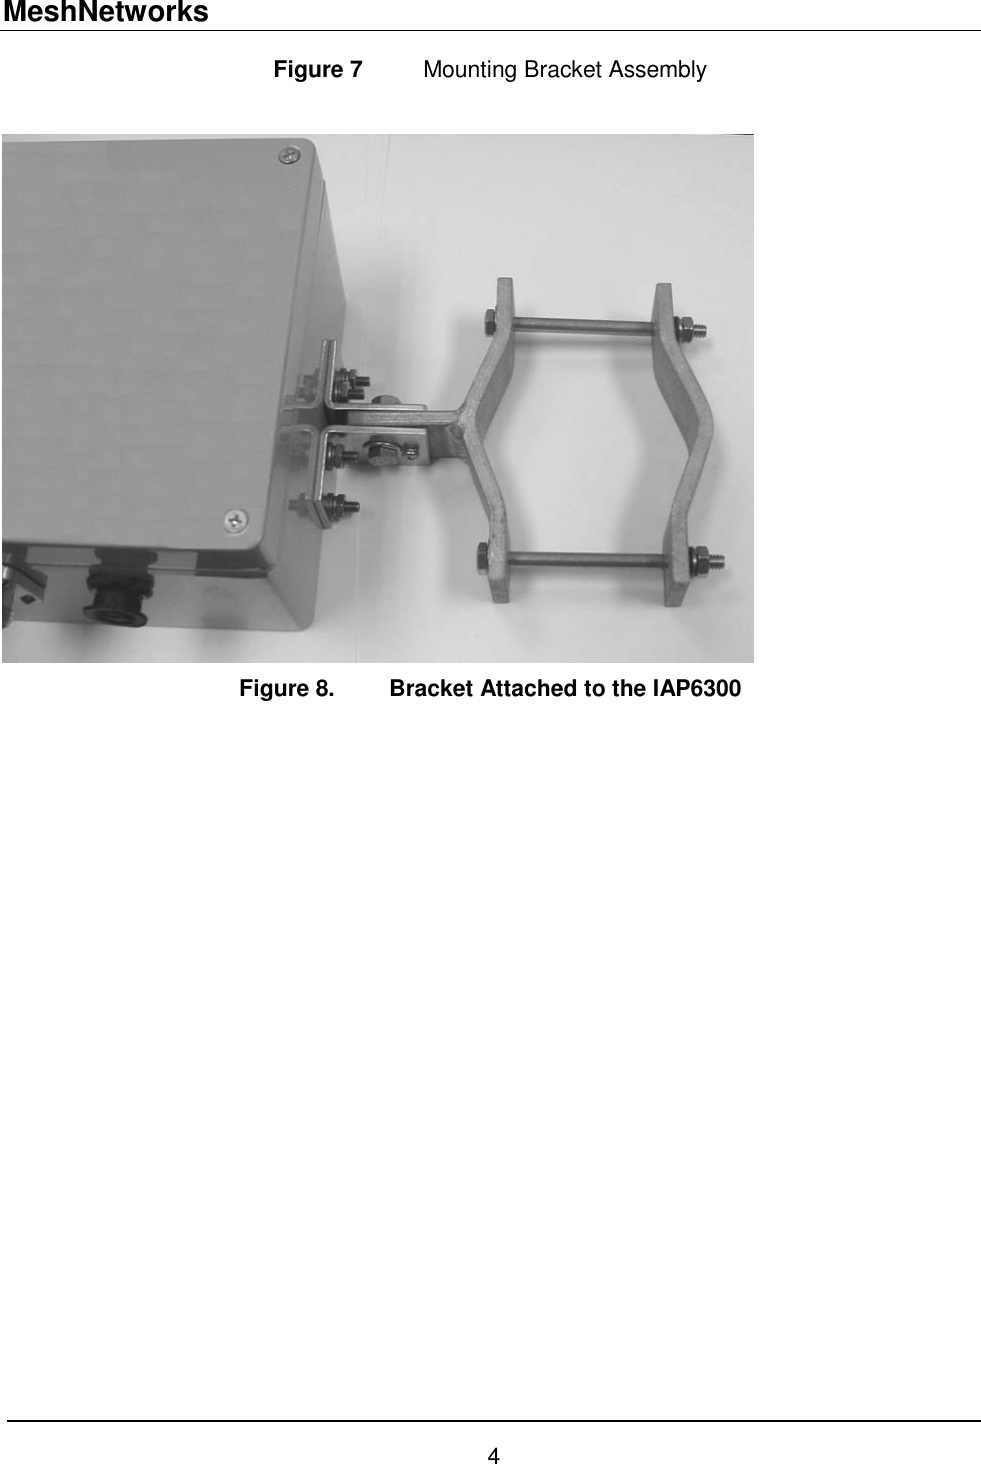 MeshNetworks 4 Figure 7  Mounting Bracket Assembly   Figure 8.  Bracket Attached to the IAP6300 